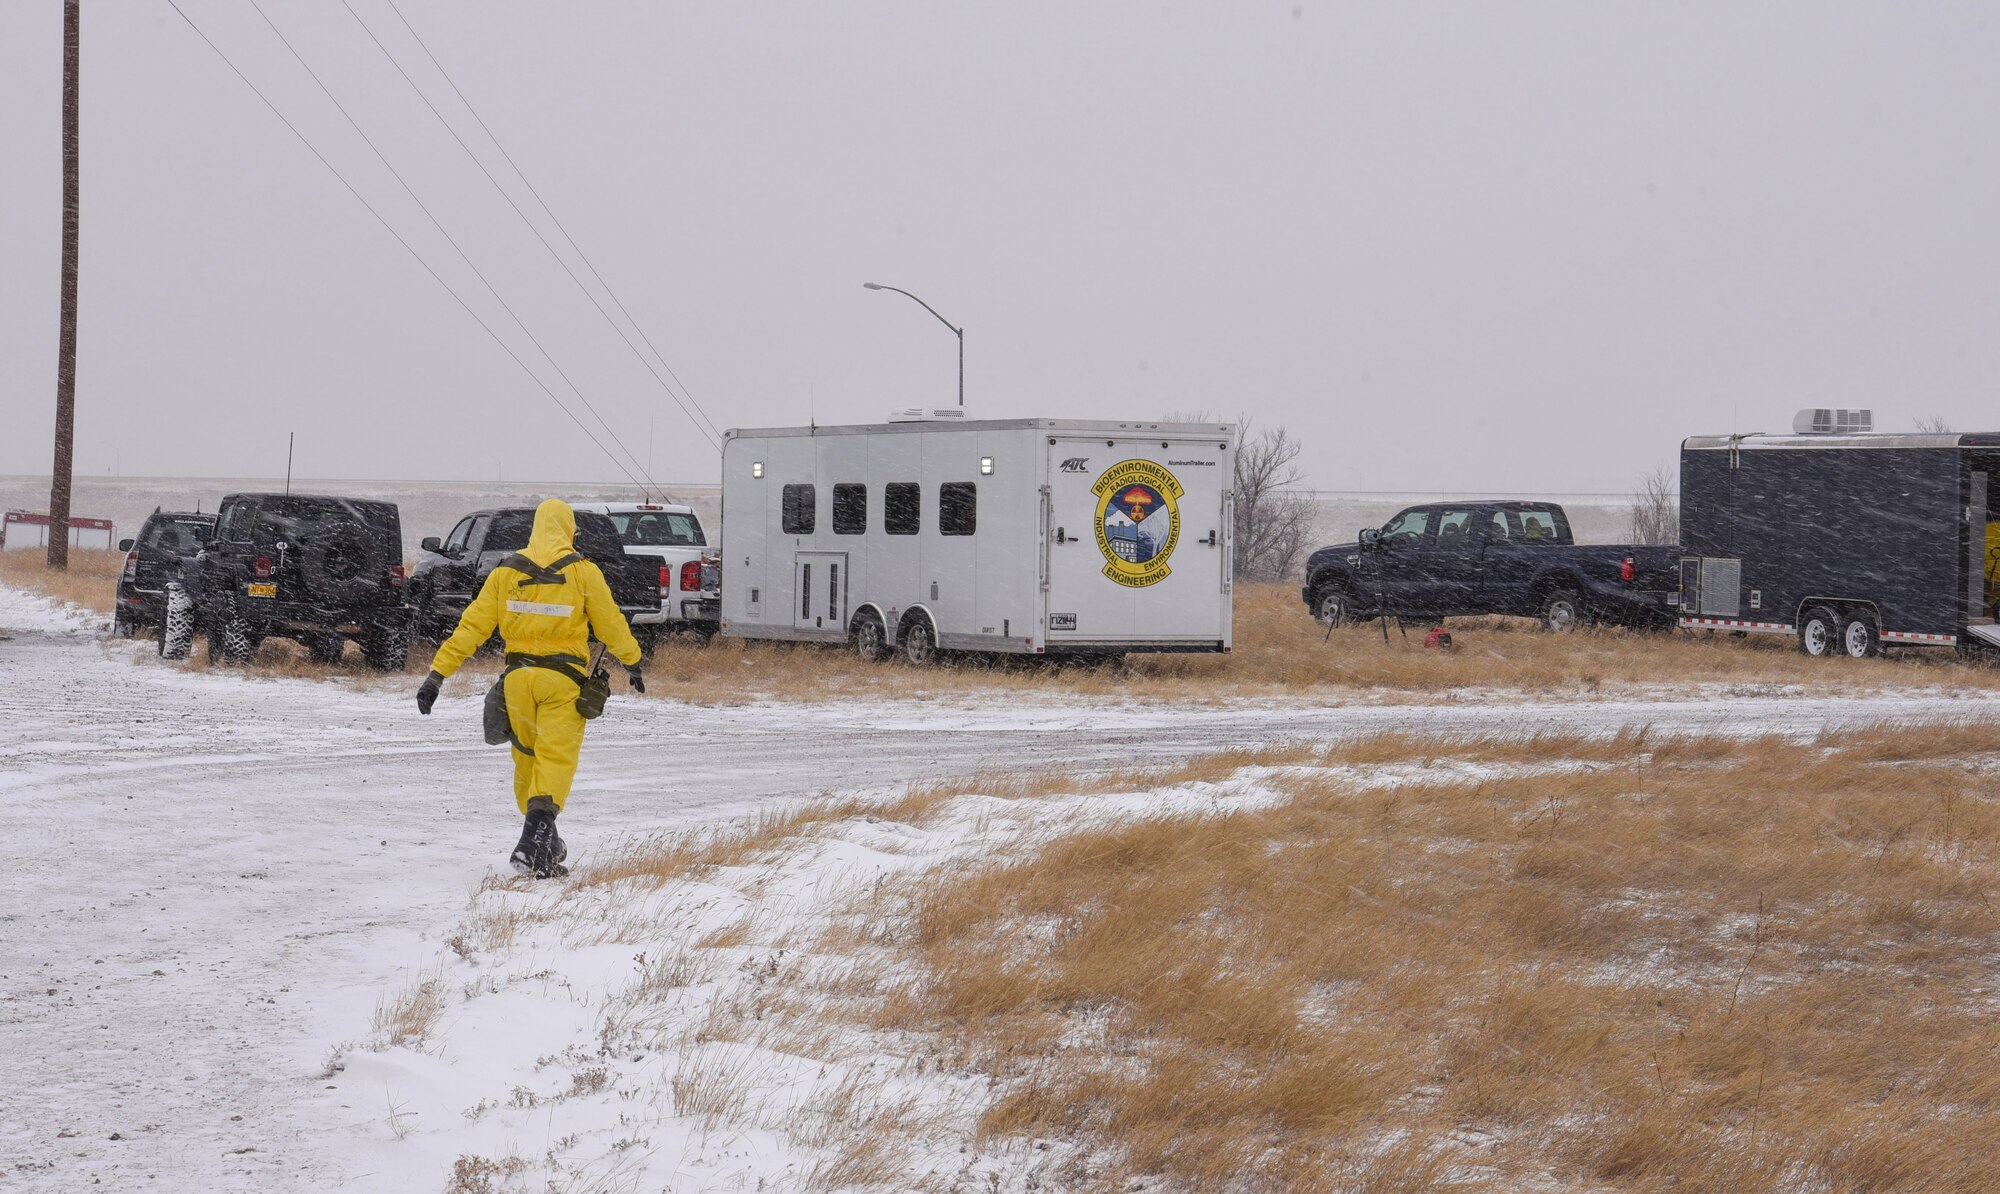 Senior Airman Mckenzie Williams, 90th Civil Engineering Squadron emergency management technician, walks to the emergency response trailer during an exercise on F.E. Warren Air Force Base, Wyo., Dec. 14, 2017. Emergency Management works with Explosive Ordinance Disposal, Fire Rescue and Bio-environmental to clean up after nuclear incidents of any kind. (U.S. Air Force photo by Airman 1st Class Braydon Williams)